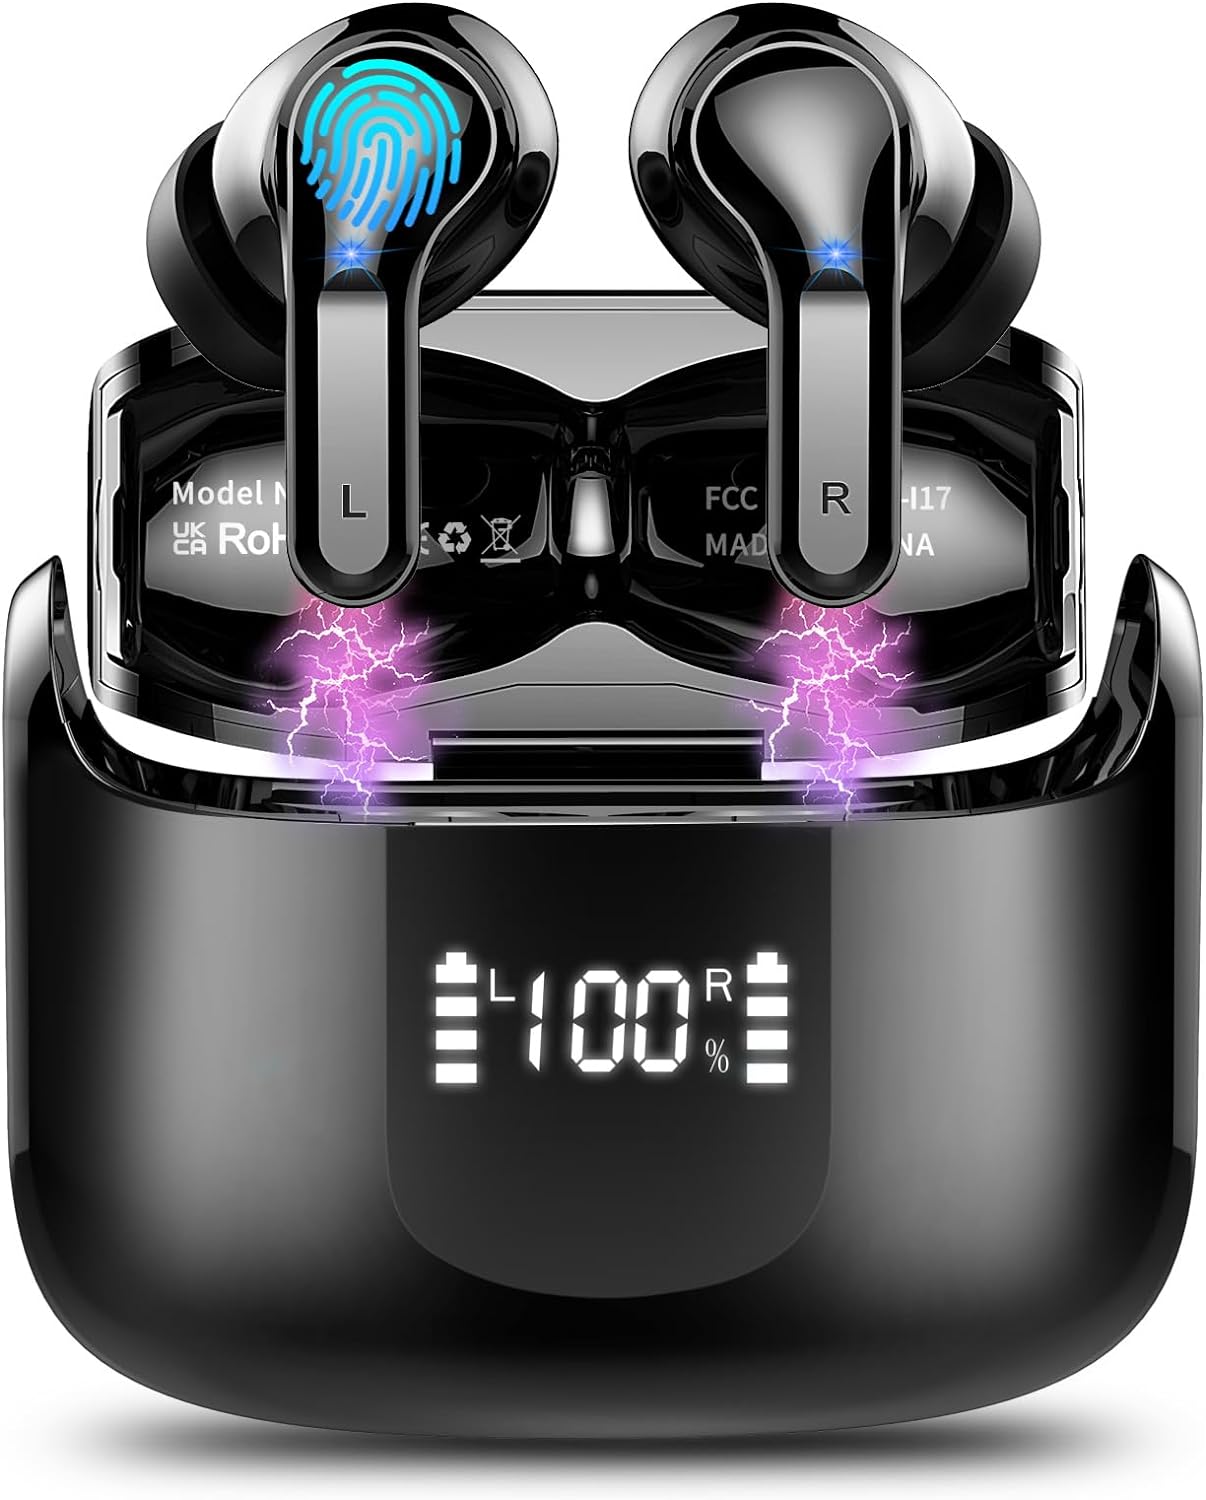 Wireless Earbud, Bluetooth Headphones 5.3 NEW 40H Ear Buds Bass Stereo Earphones Noise Cancelling Earbud with 4 ENC Mic in-Ear Bluetooth Earbud USB-C LED Display IP7 Waterproof Sport for Android iOS